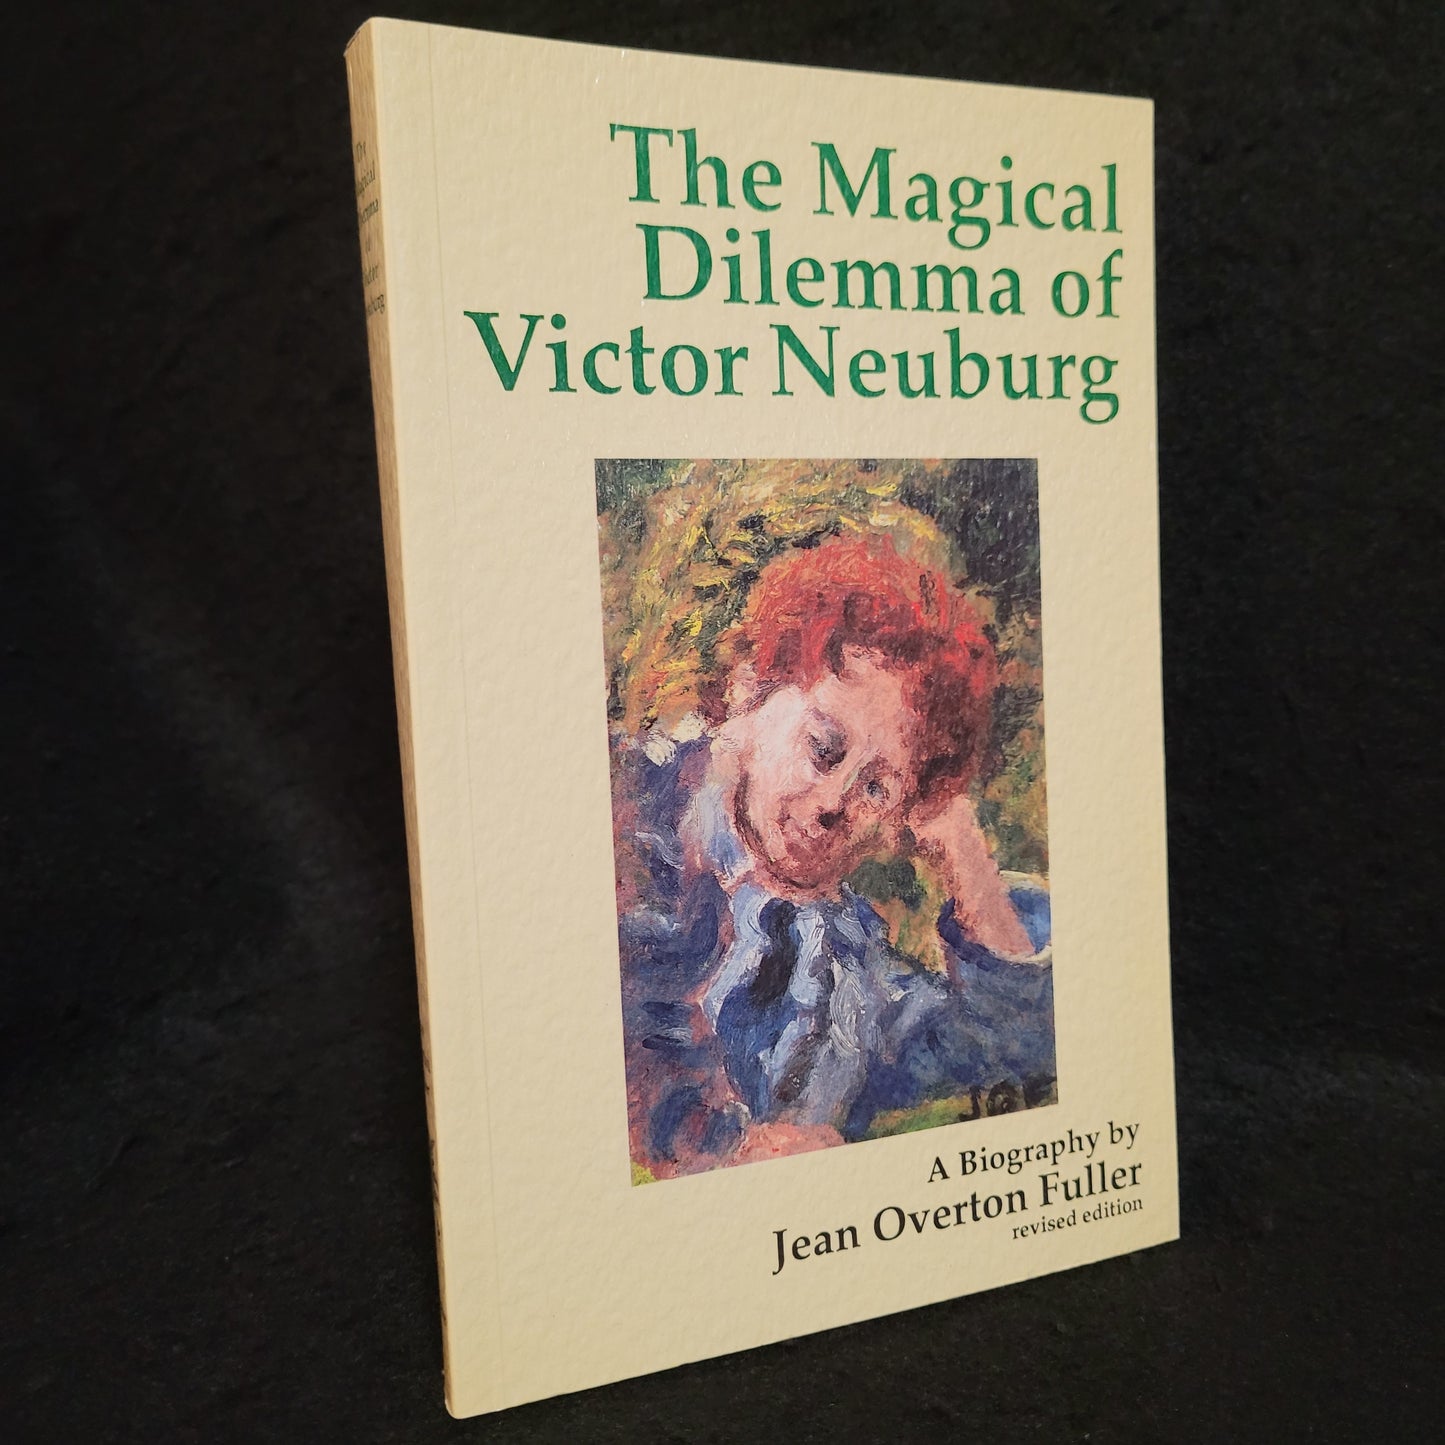 The Magical Dilemma of Victor Neuburg: A Biography by Jean Overton Fuller (Mandrake, 1990) Paperback